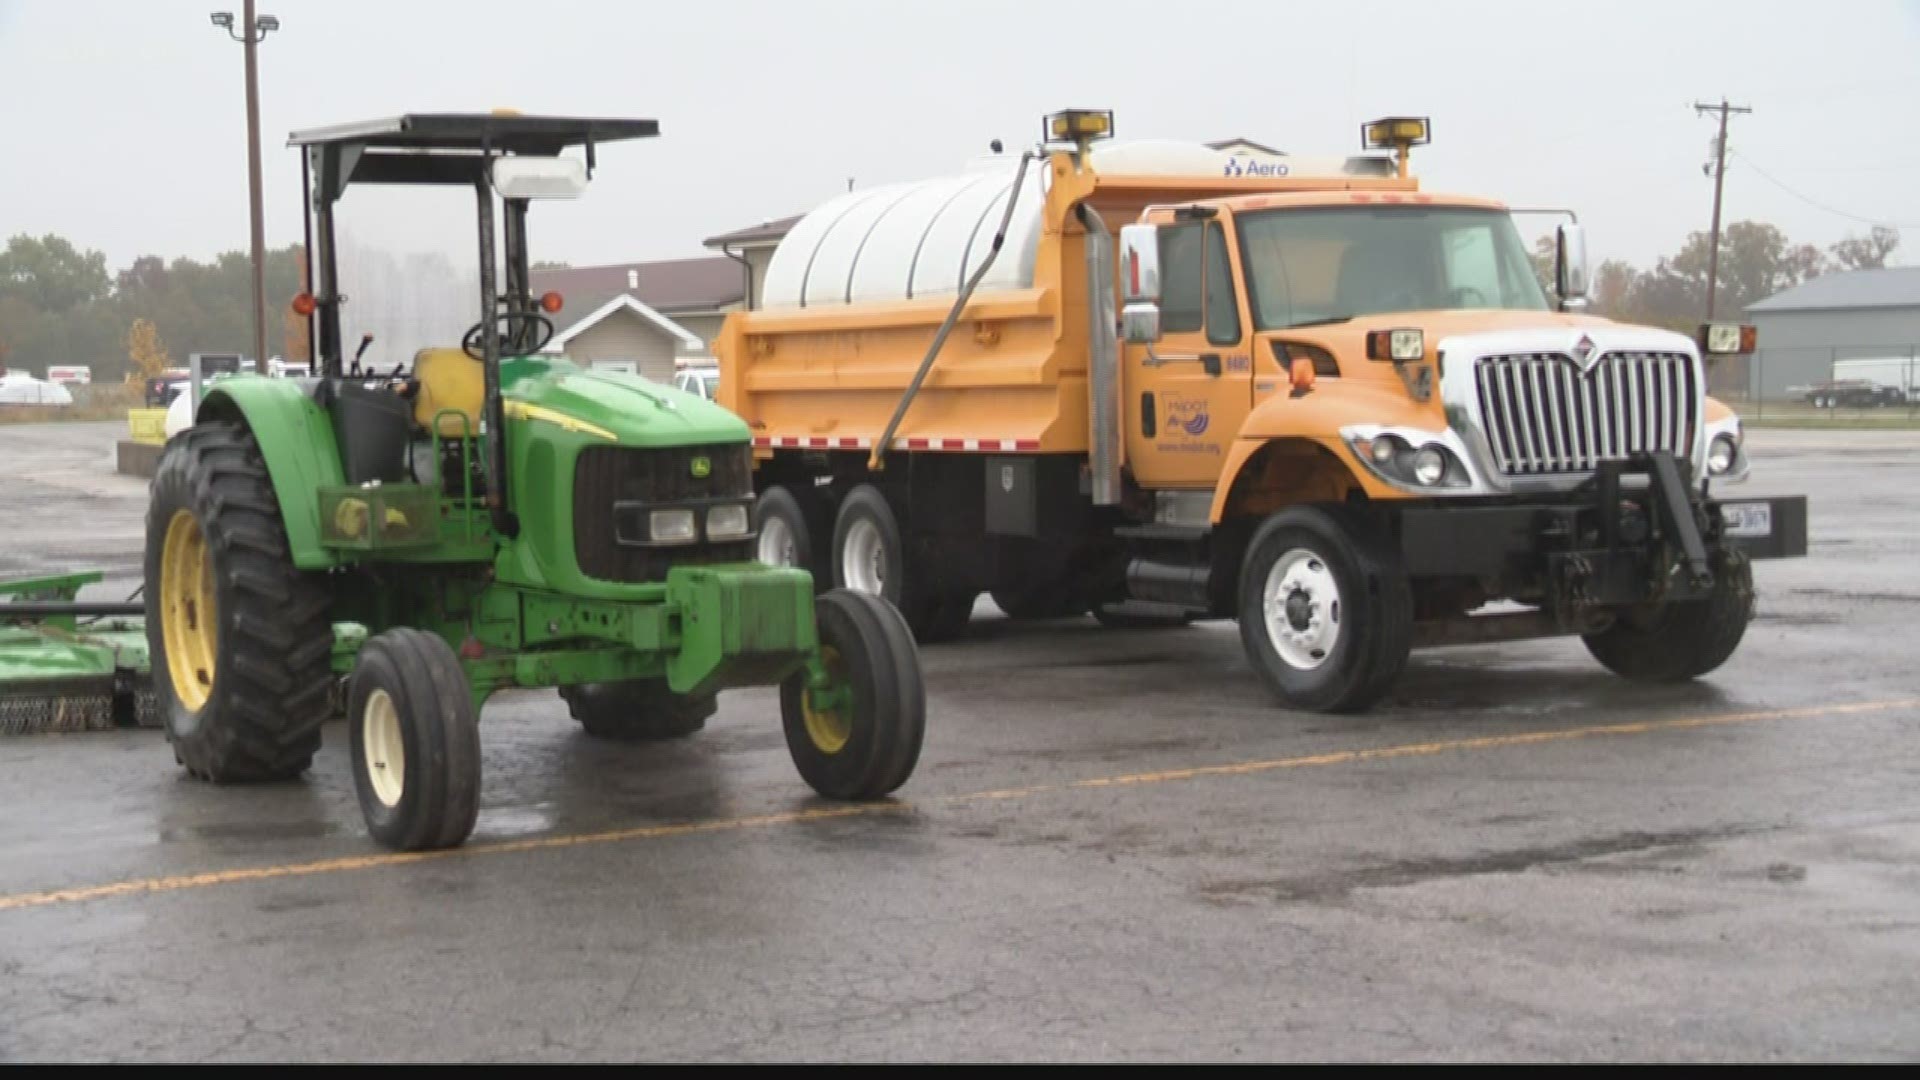 "We’ve got our salt supply in and we’ve got our trucks outfitted so when our crews have to come back in, we’re ready to go," says Erik Maninga, a MoDOT engineer.